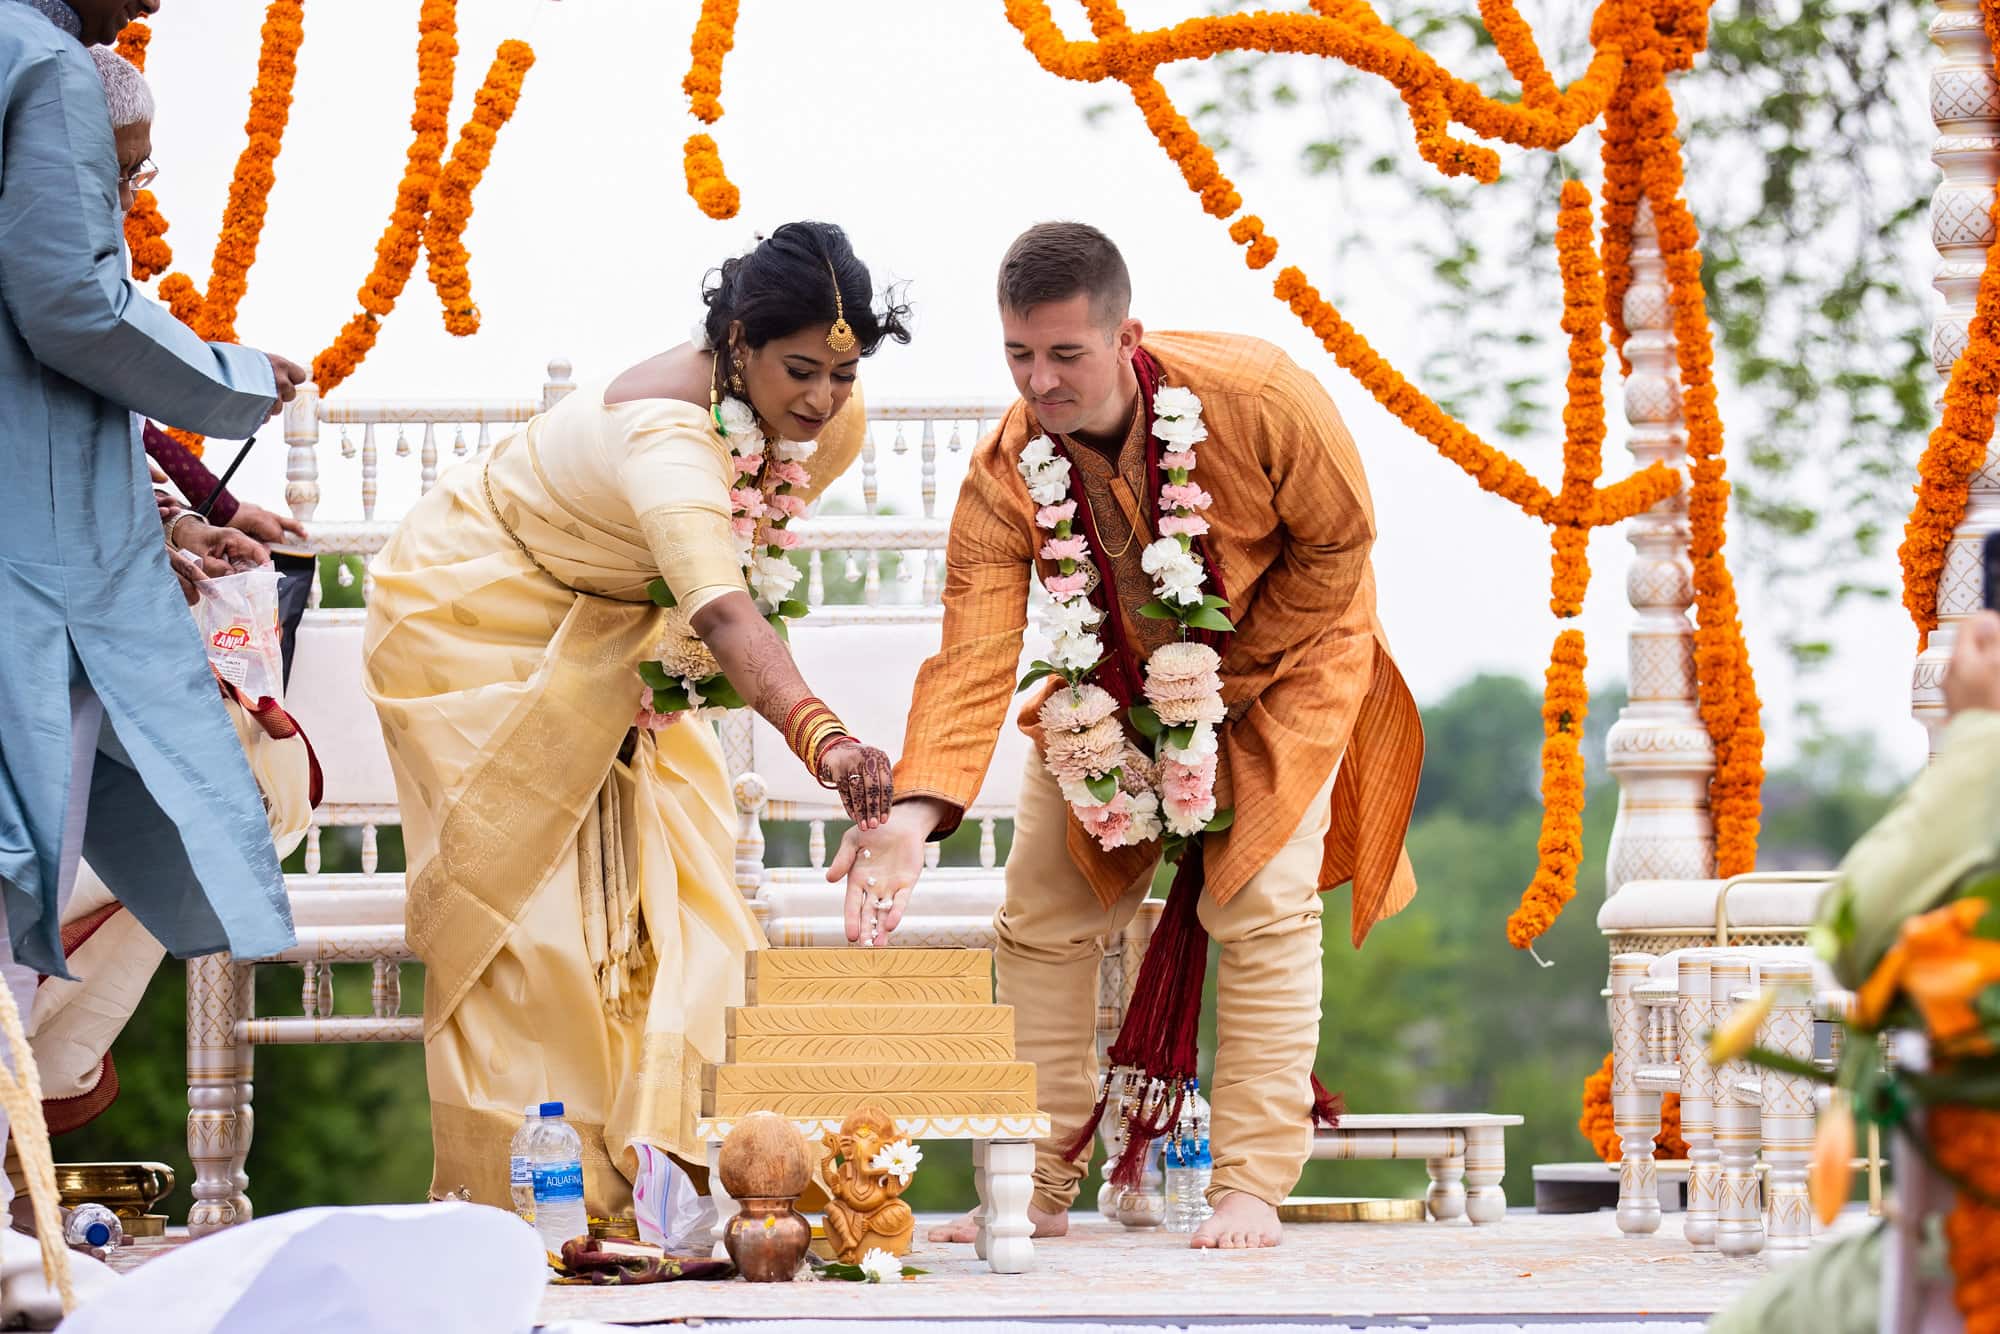 Bride and groom put puffed rice into the fire at their traditional Indian wedding ceremony at Glen Oaks Country Club.